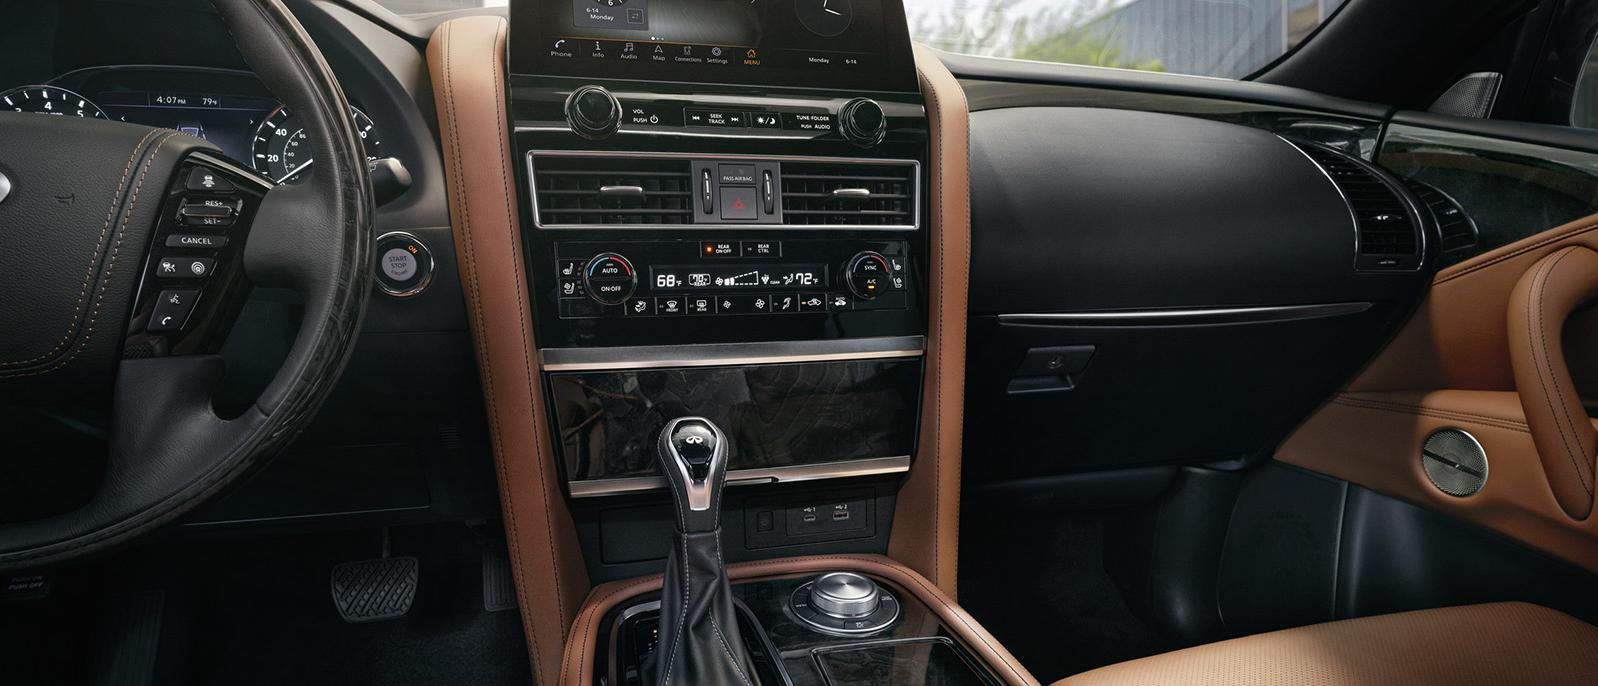 Interior view of the INFINITI QX80 featuring